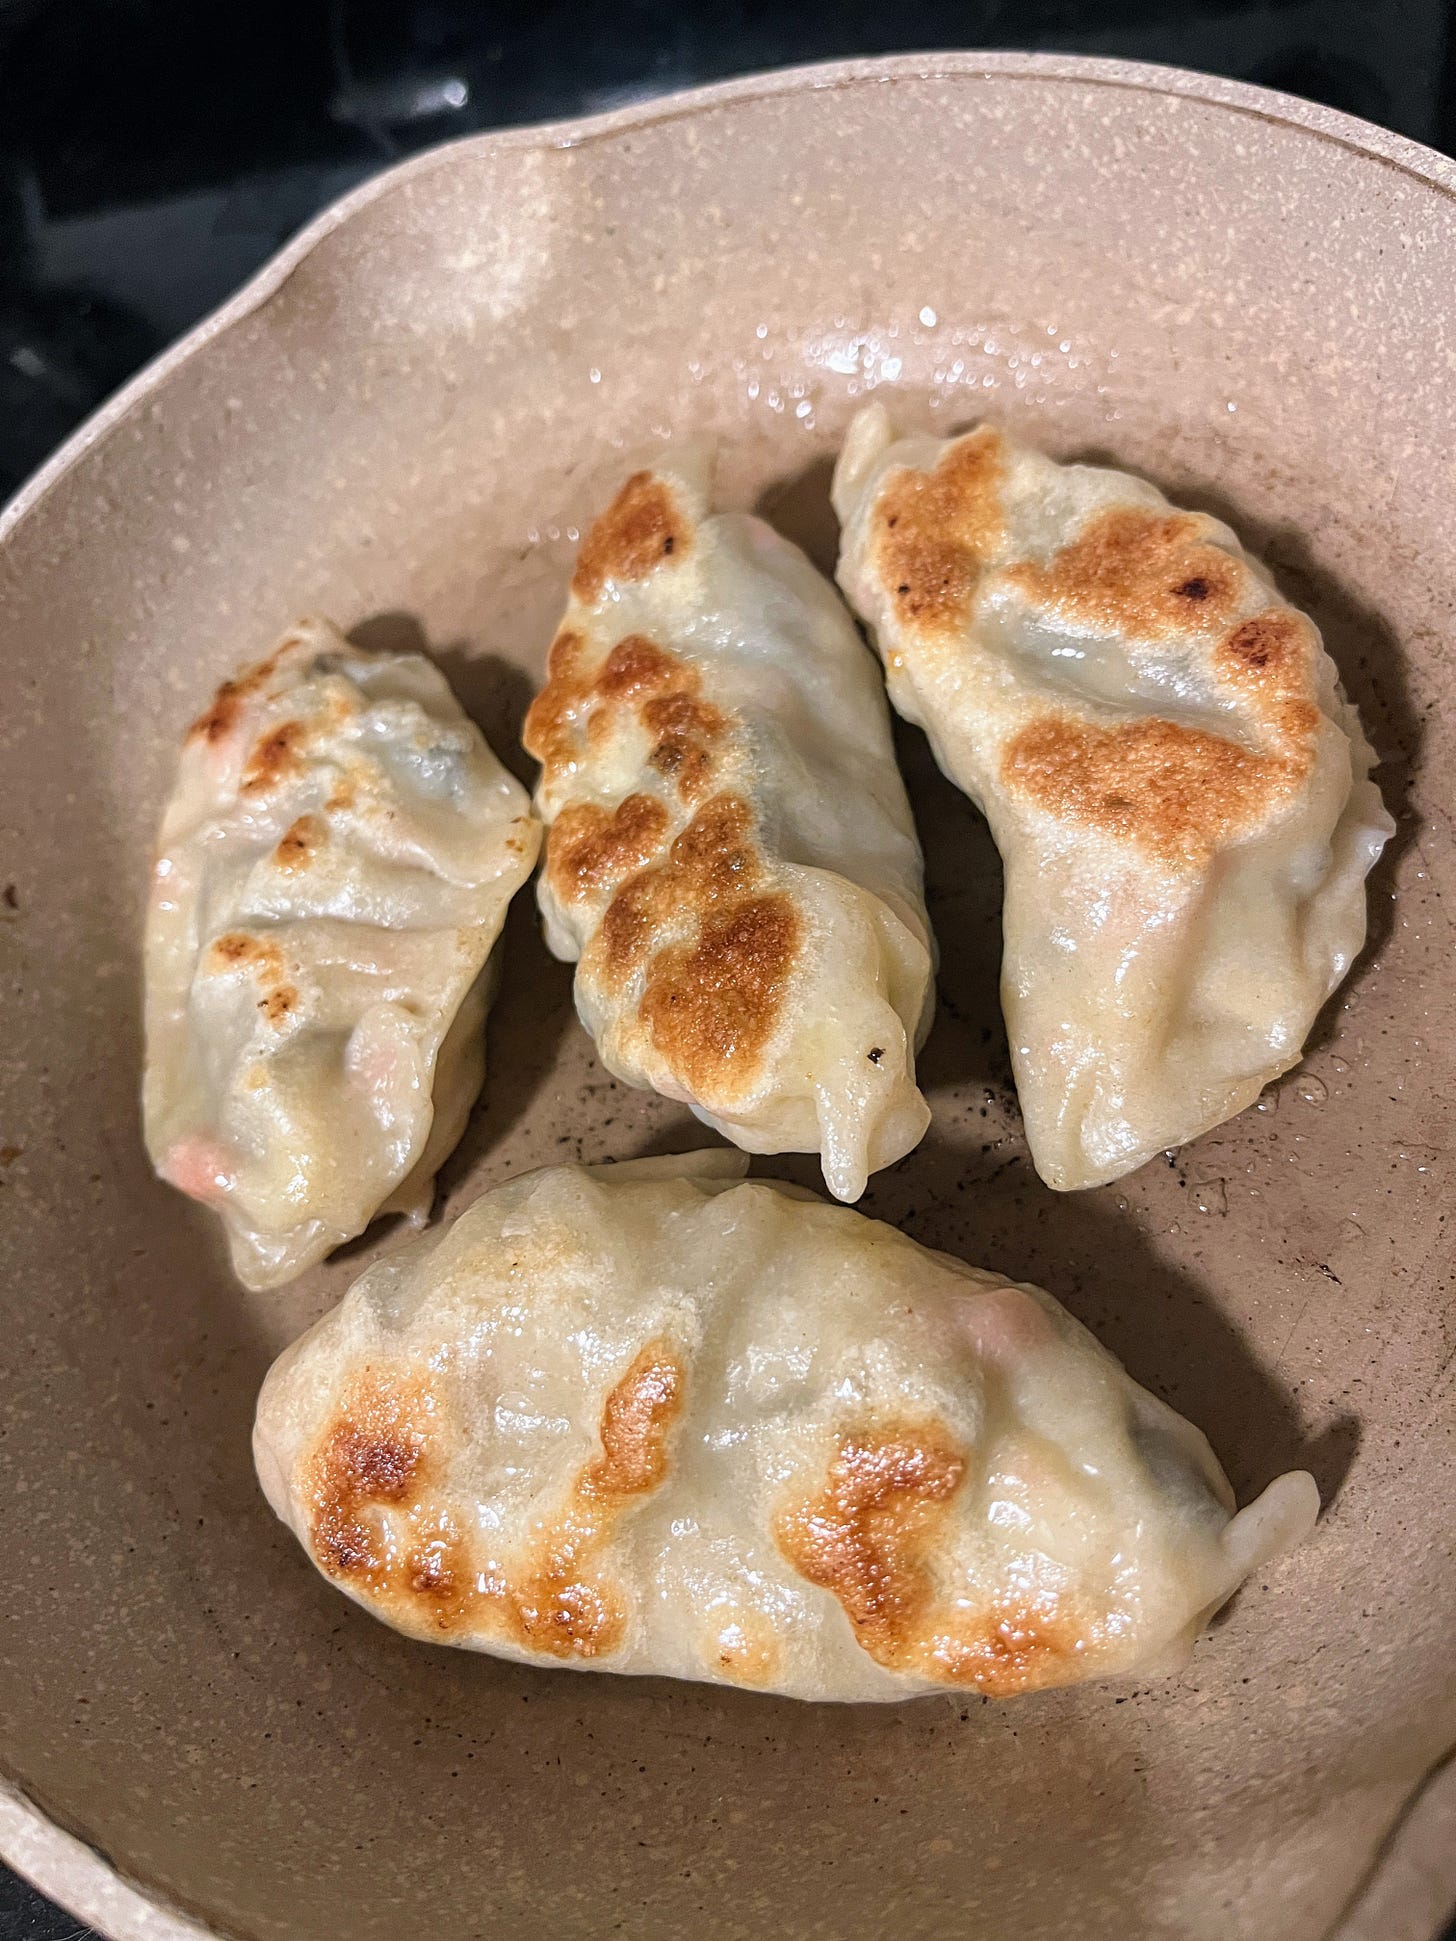 four potstickers in a gray frying pan